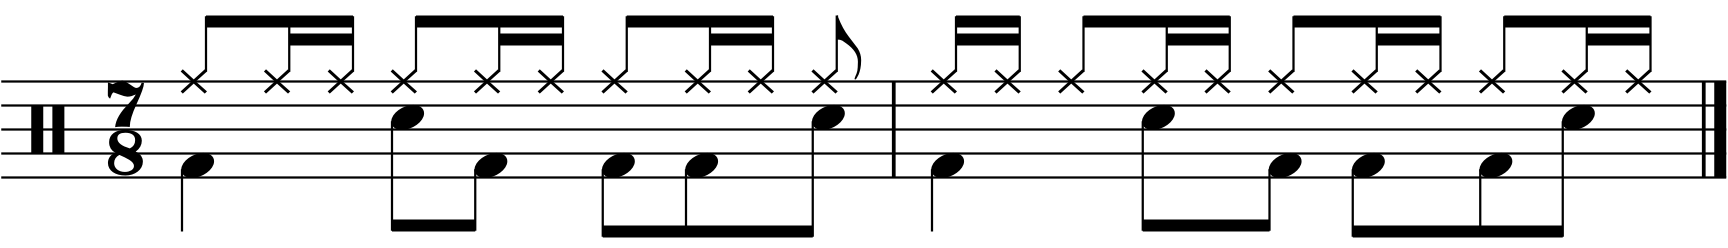 A two bar 7/8 grooves with a 1 a+ right hand